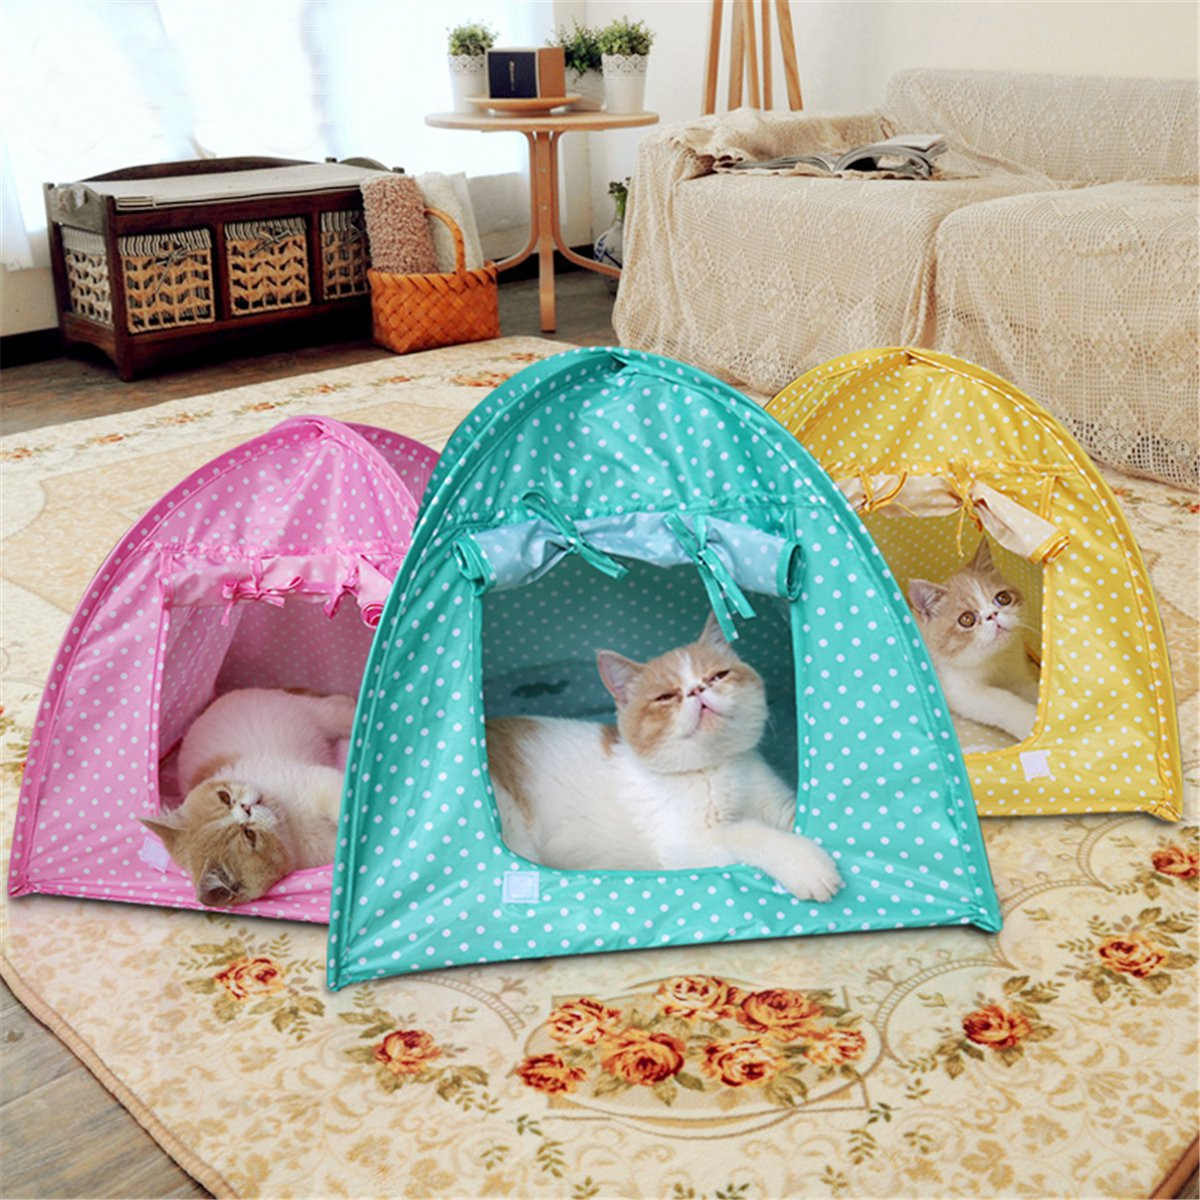 Foldable-Pet-Cat-Tent-Playing-Bed-House-Kitty-Camp-Waterproof-Outdoor-Dog-Kennel-1127104